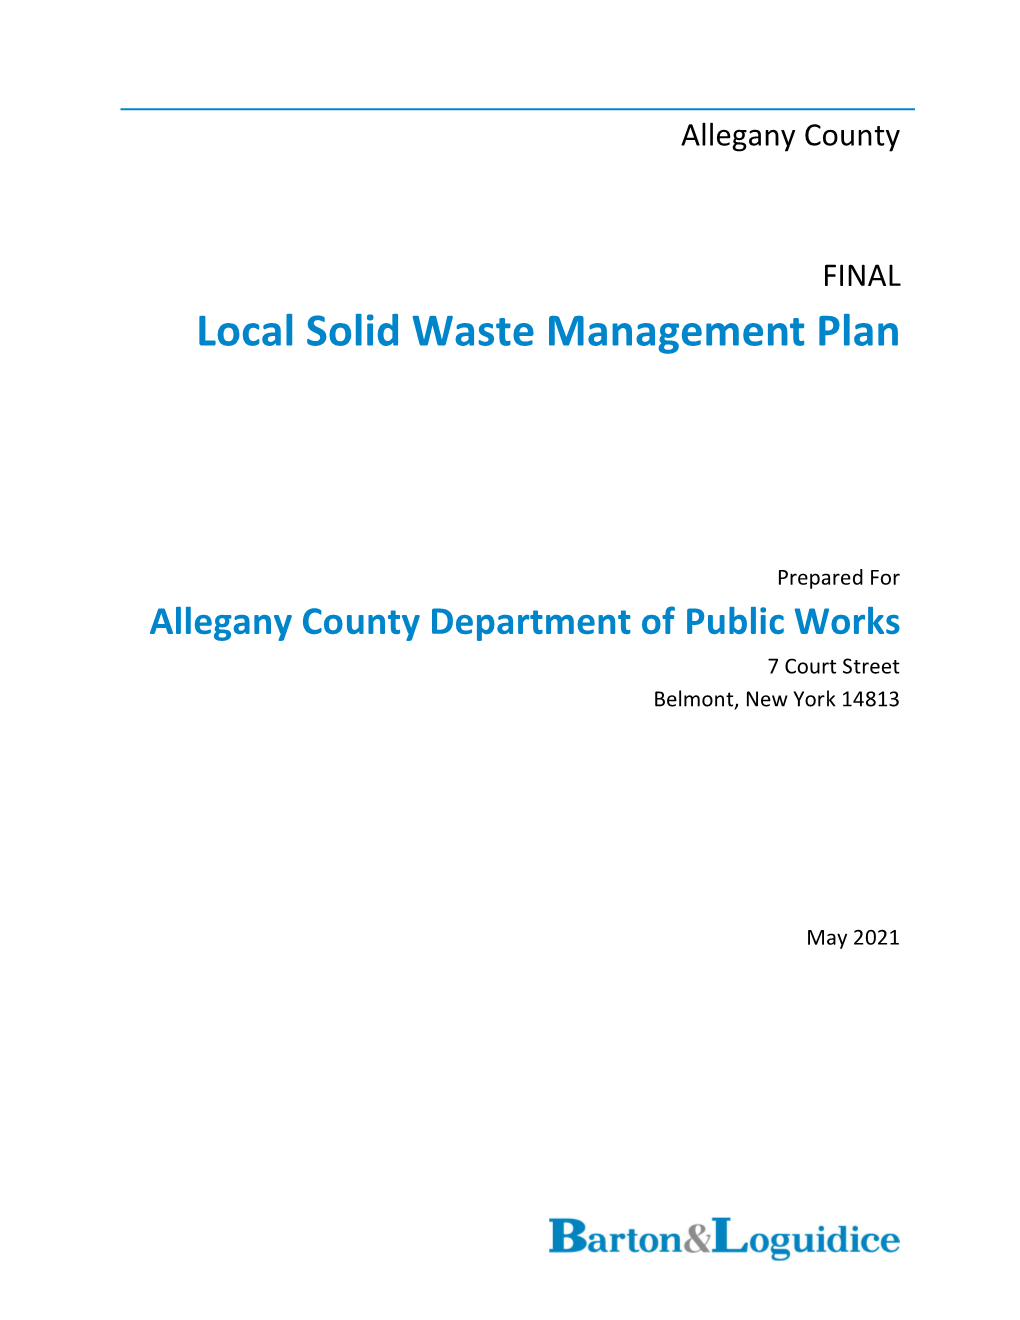 Local Solid Waste Management Plan